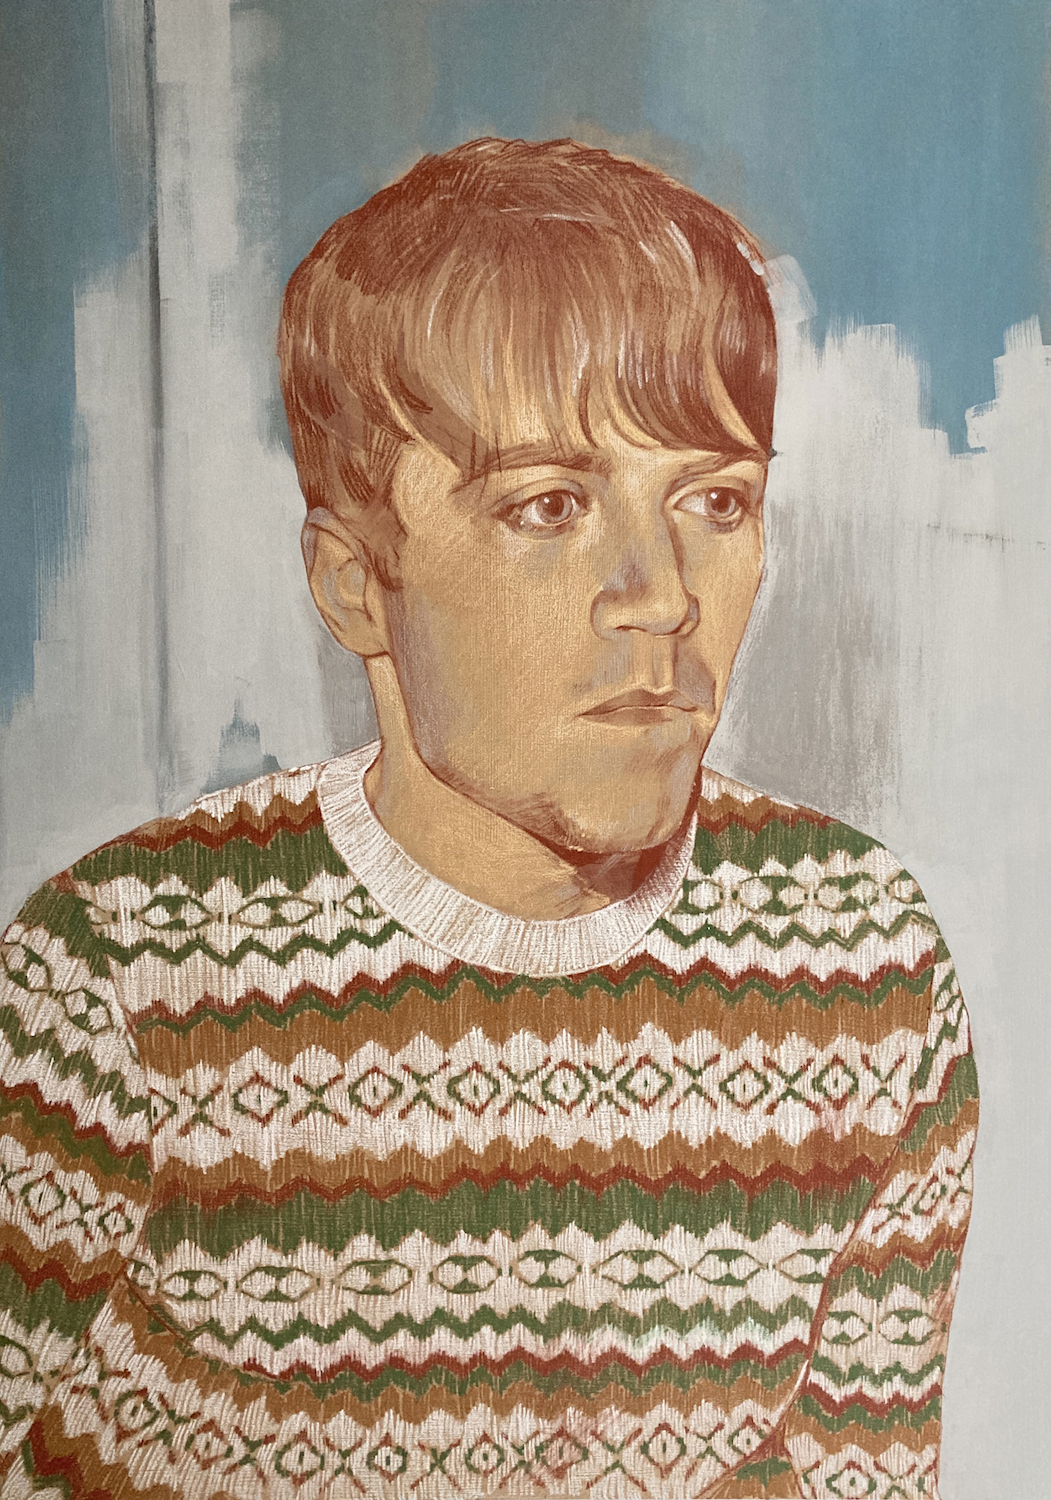 'Luke', Laura Hope, Coloured pencil, wax pastels and acrylic gouache on board, 85 x 60 cm